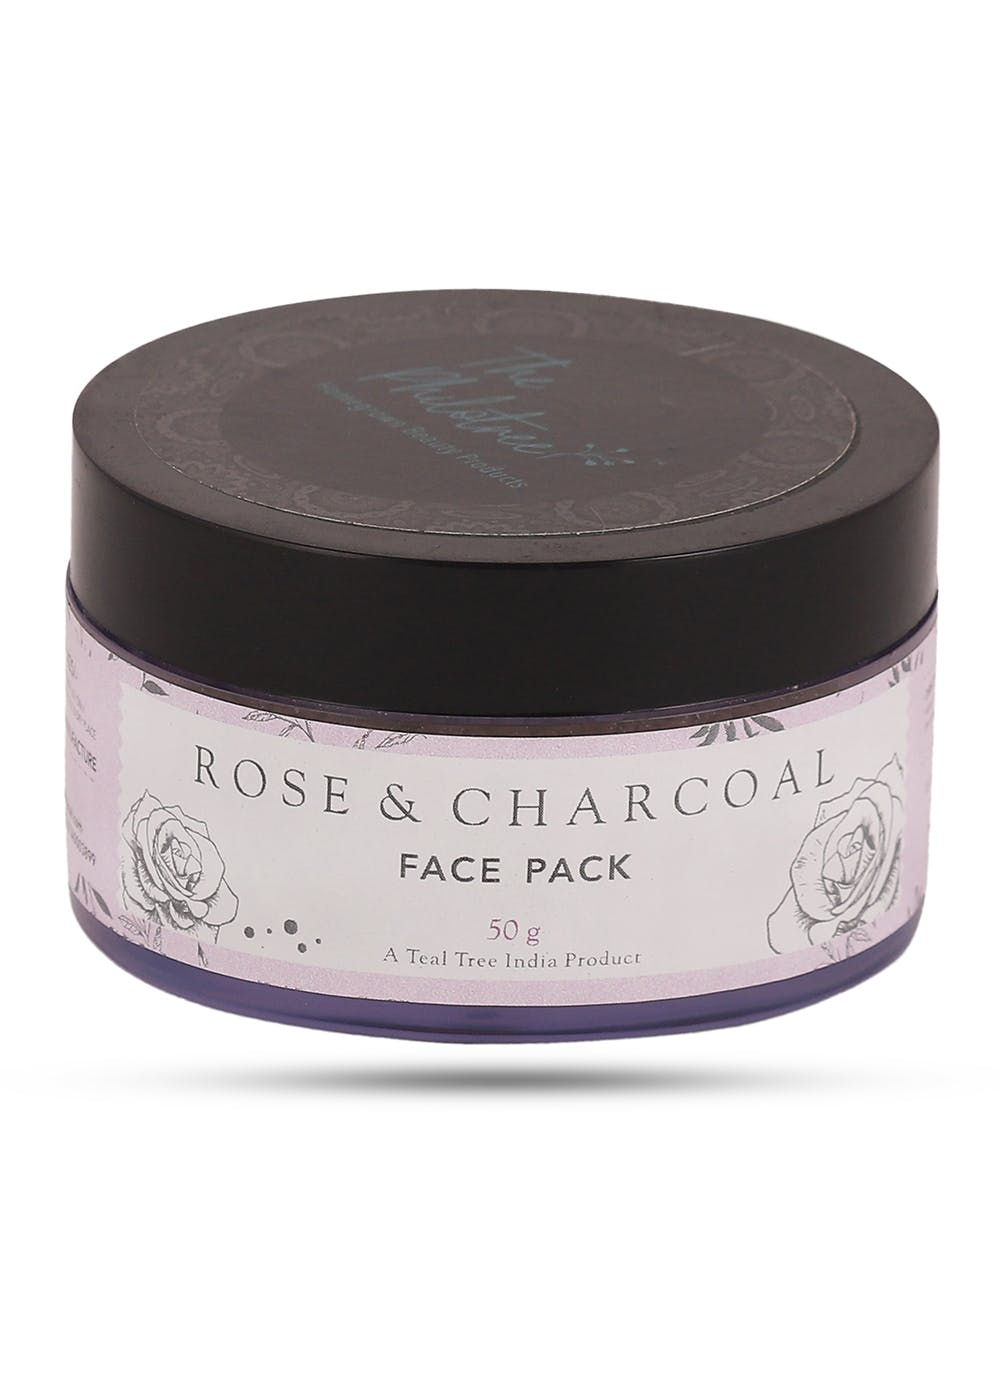 Rose & Charcoal Face Pack